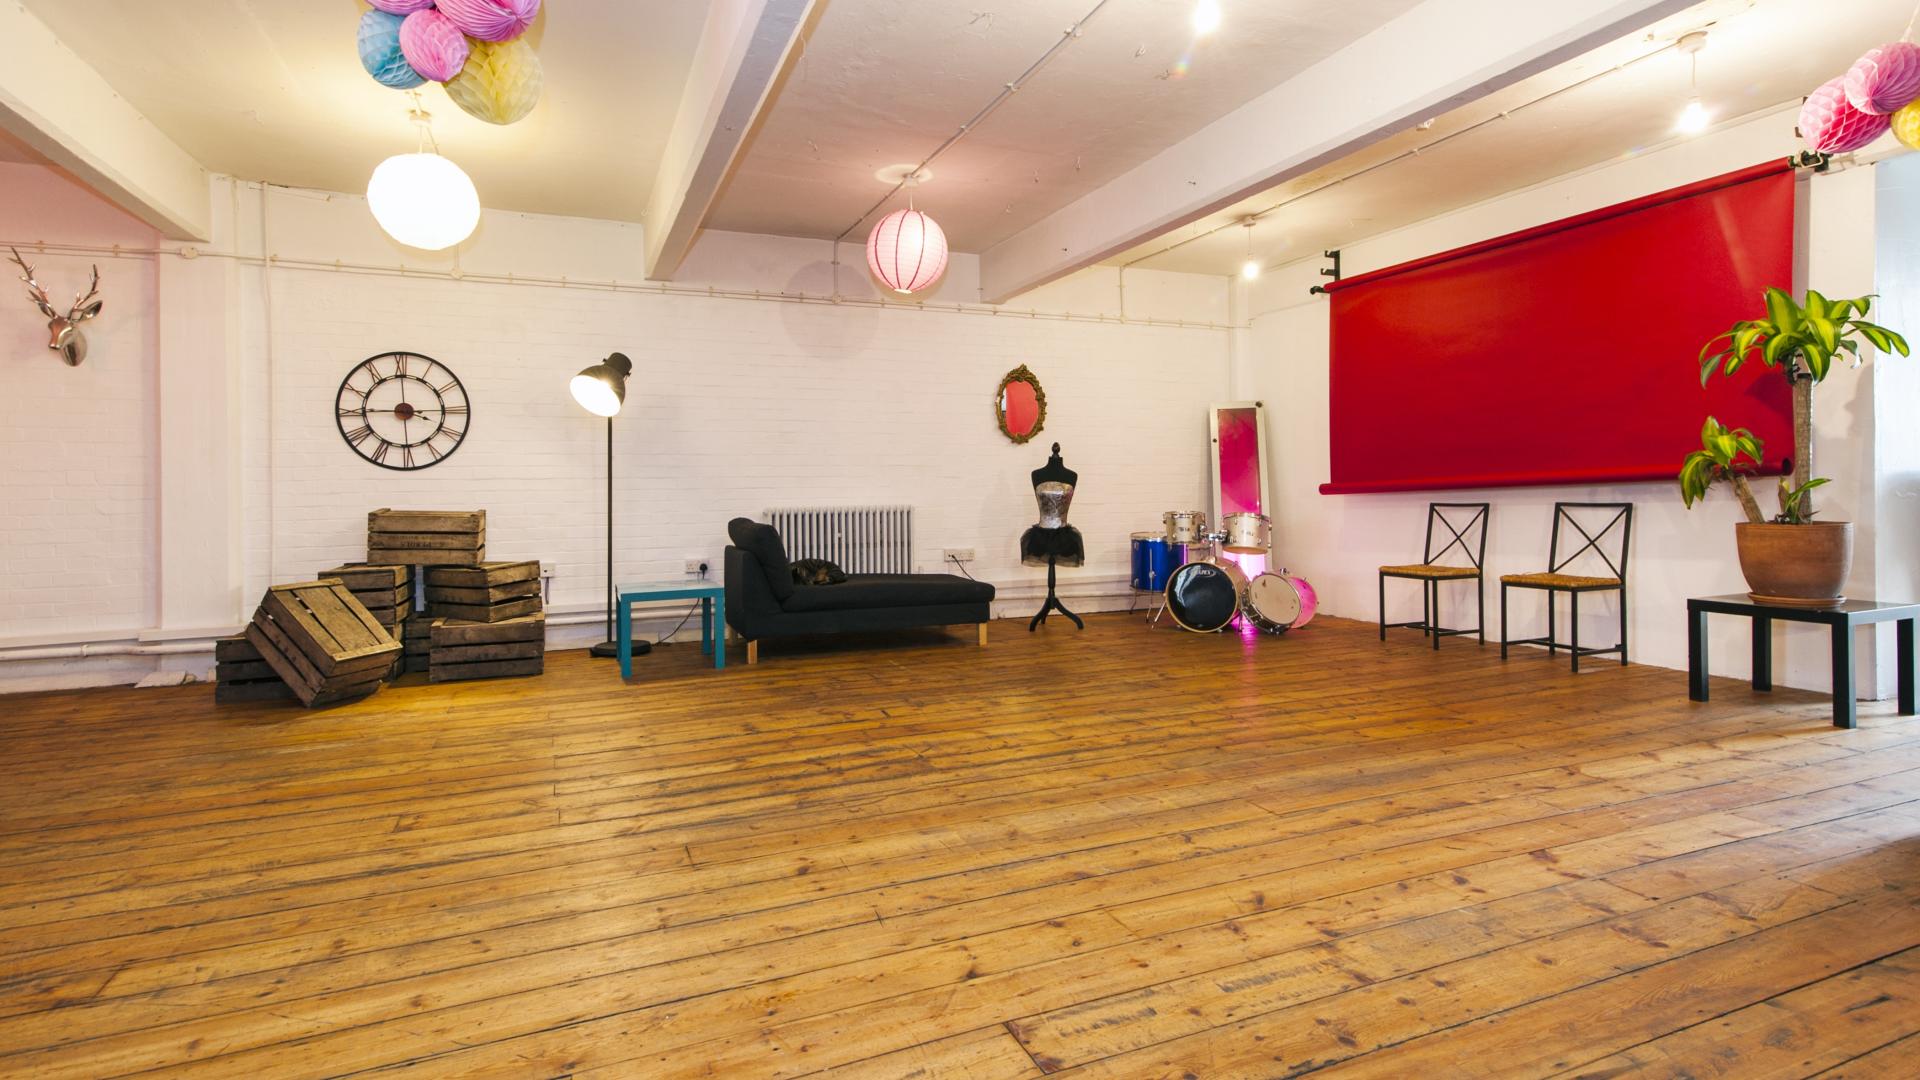 Art Studios for Hire in South London